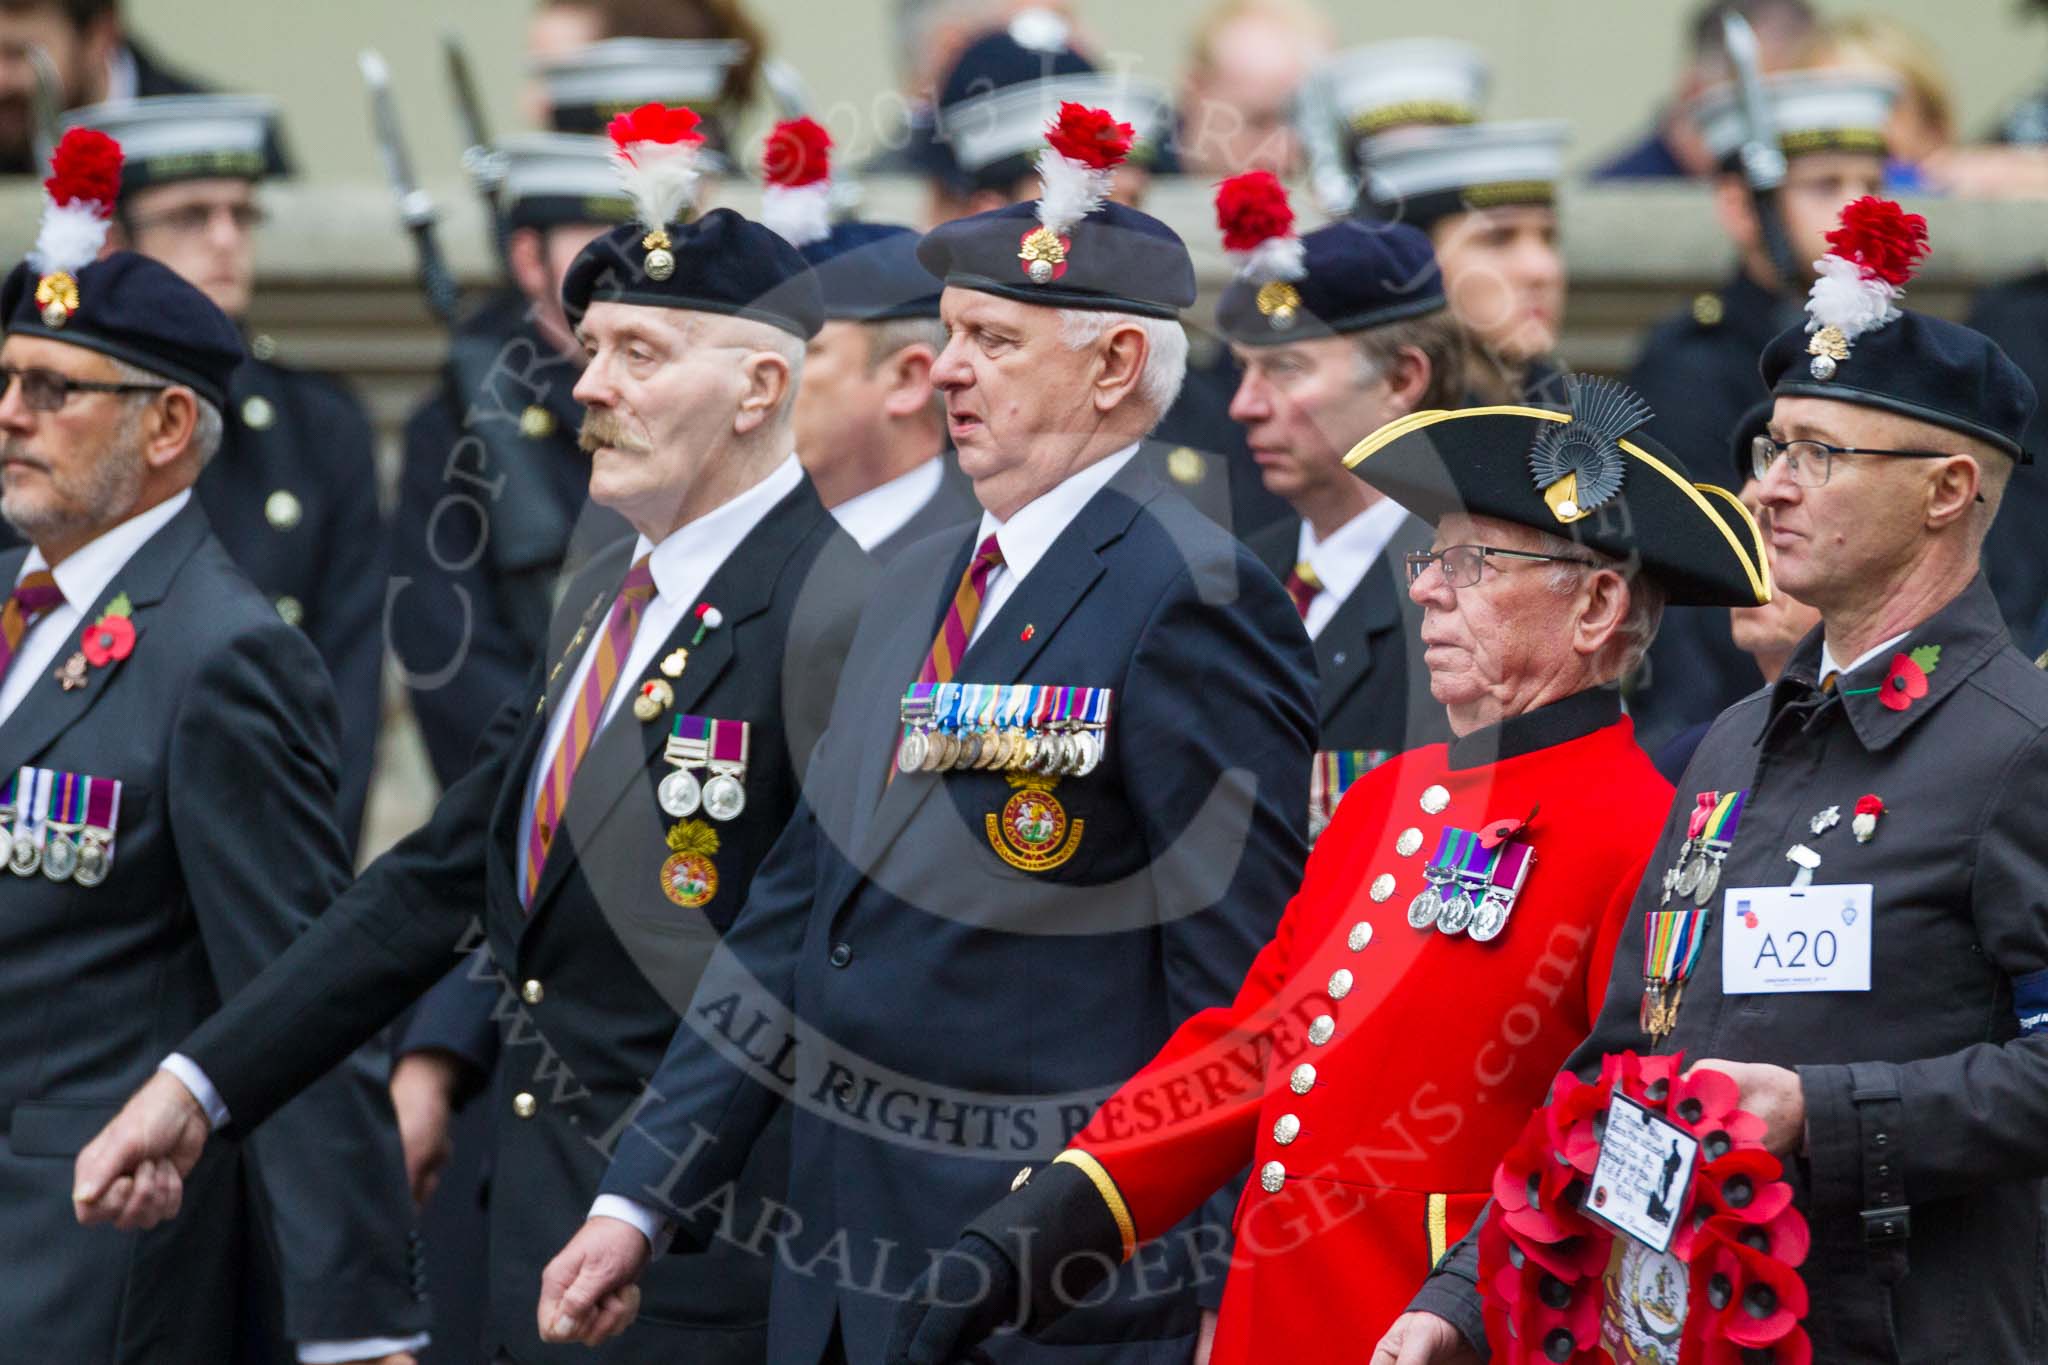 Remembrance Sunday at the Cenotaph 2015: Group A20, Royal Northumberland Fusiliers.
Cenotaph, Whitehall, London SW1,
London,
Greater London,
United Kingdom,
on 08 November 2015 at 12:12, image #1325